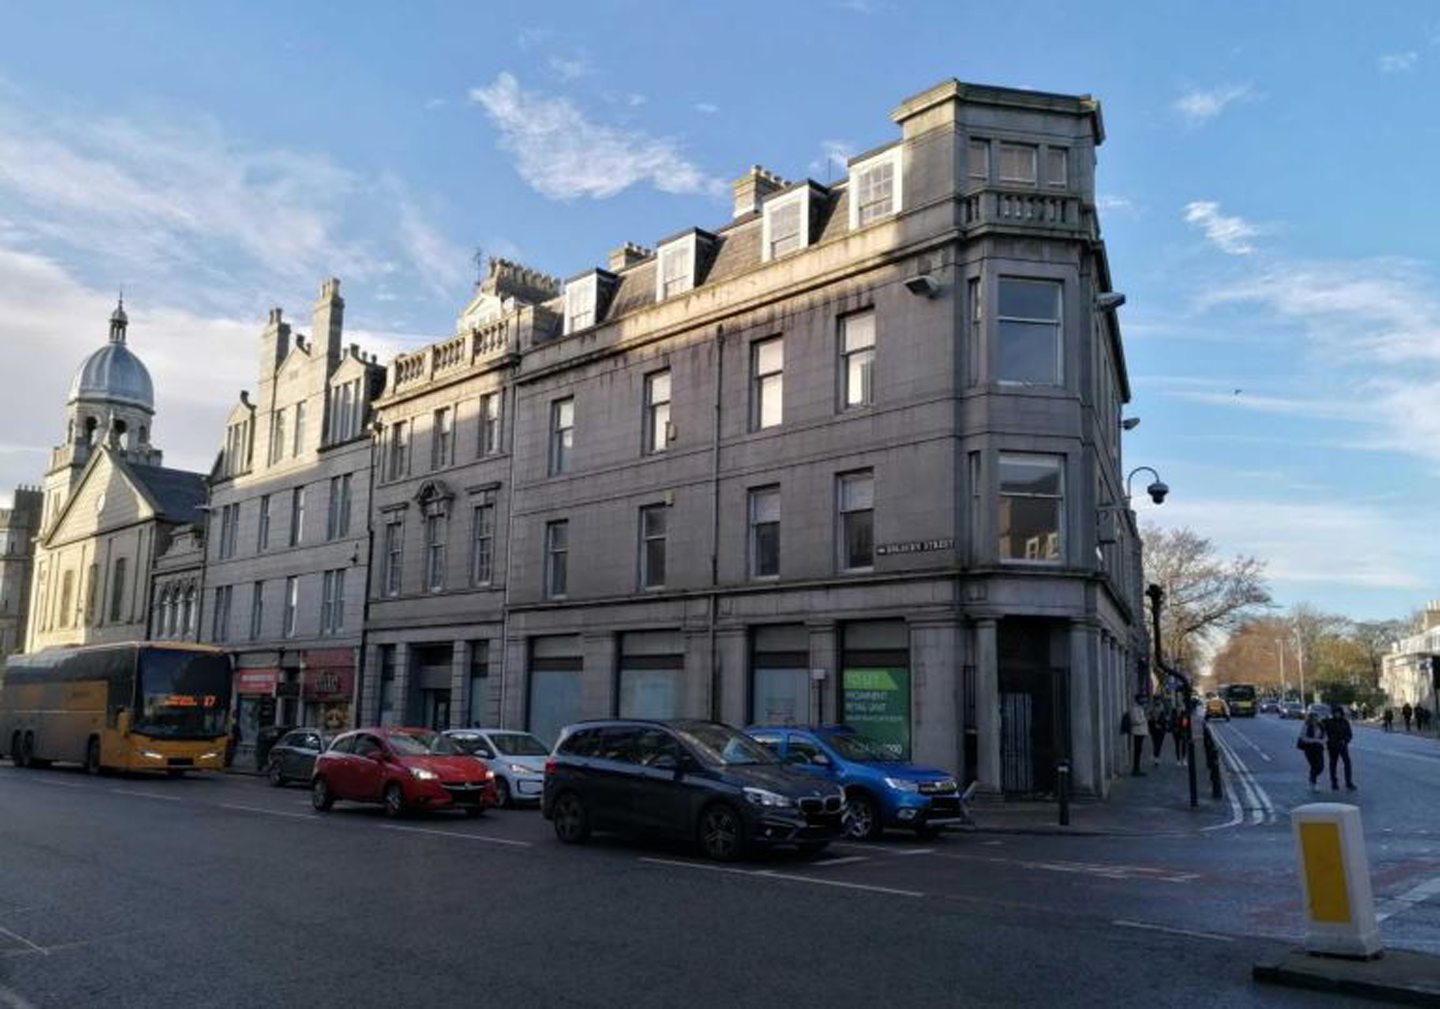 This Holburn Street office block could become new flats if plans are given the go-ahead.